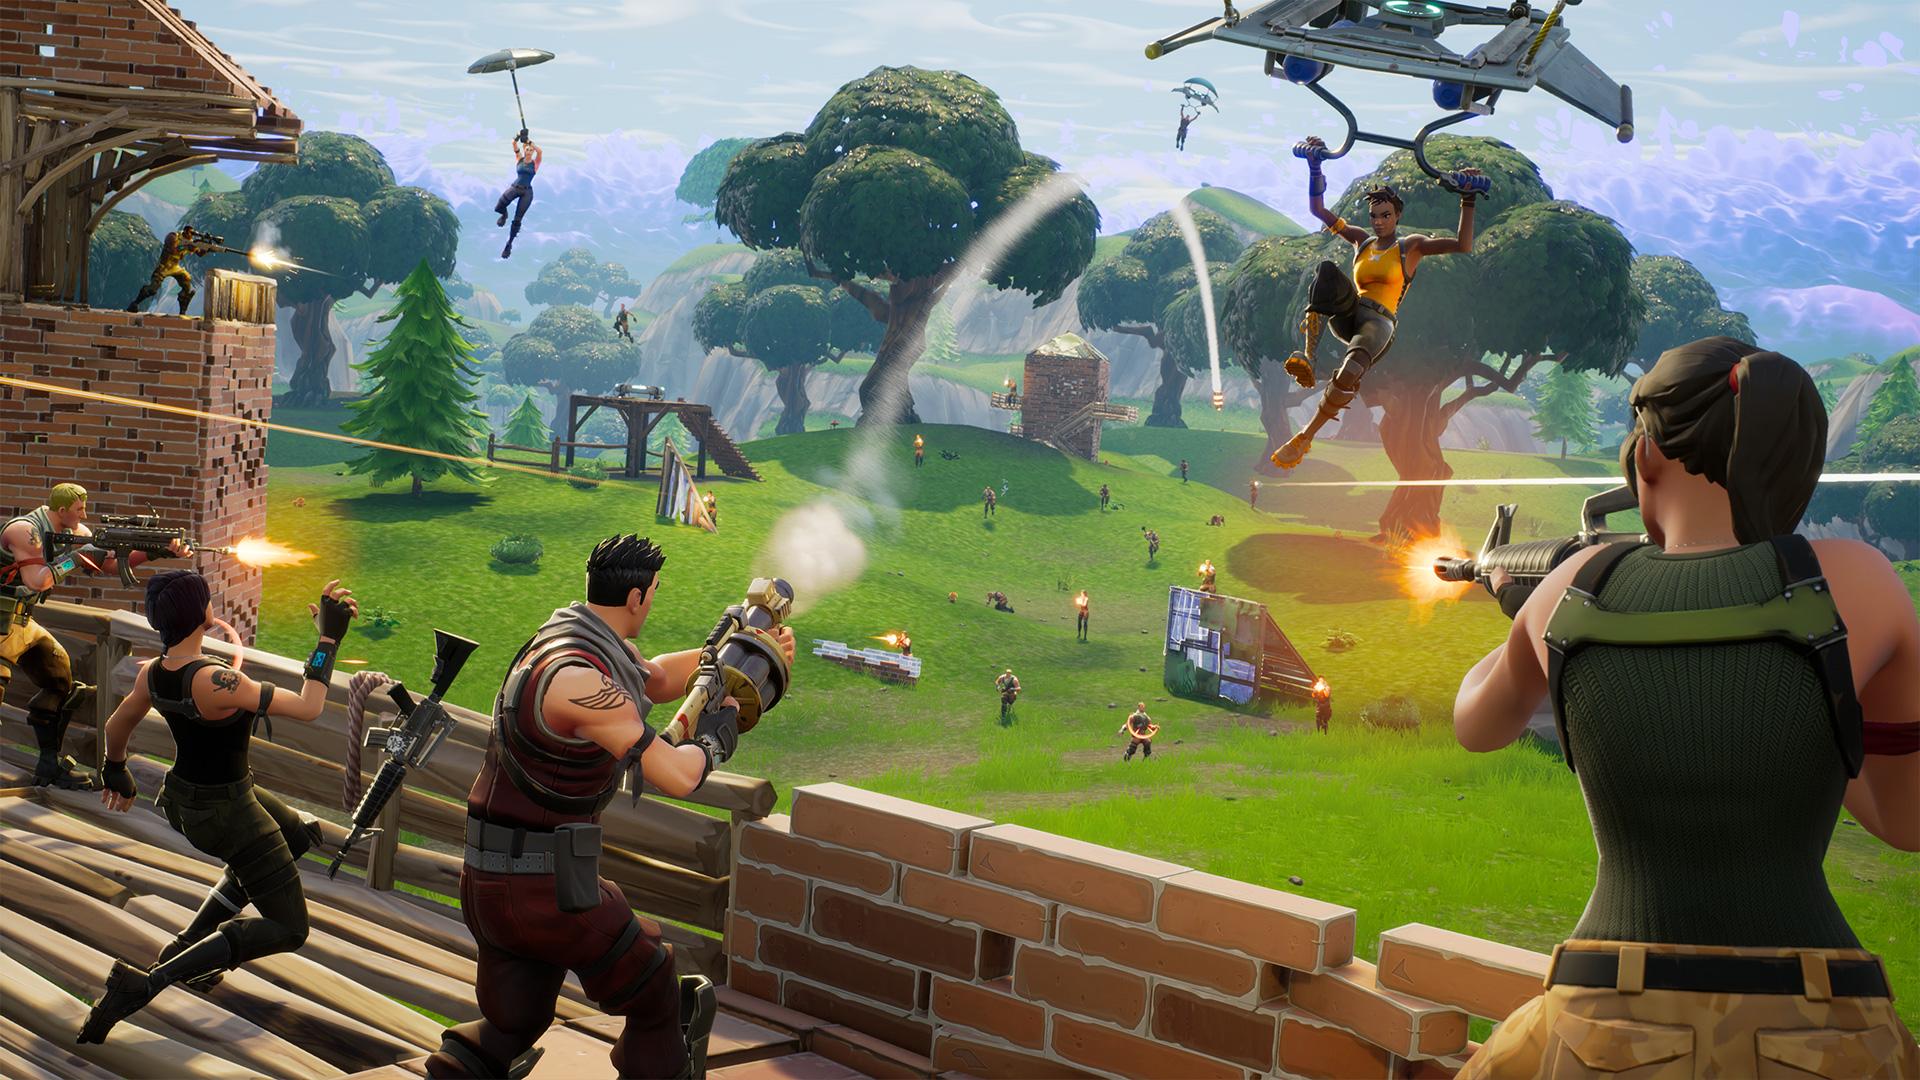 last year around the time of avengers infinity war s release fortnite introduced a limited time event that allowed players to wield the infinity gauntlet - fortnite x infinity war